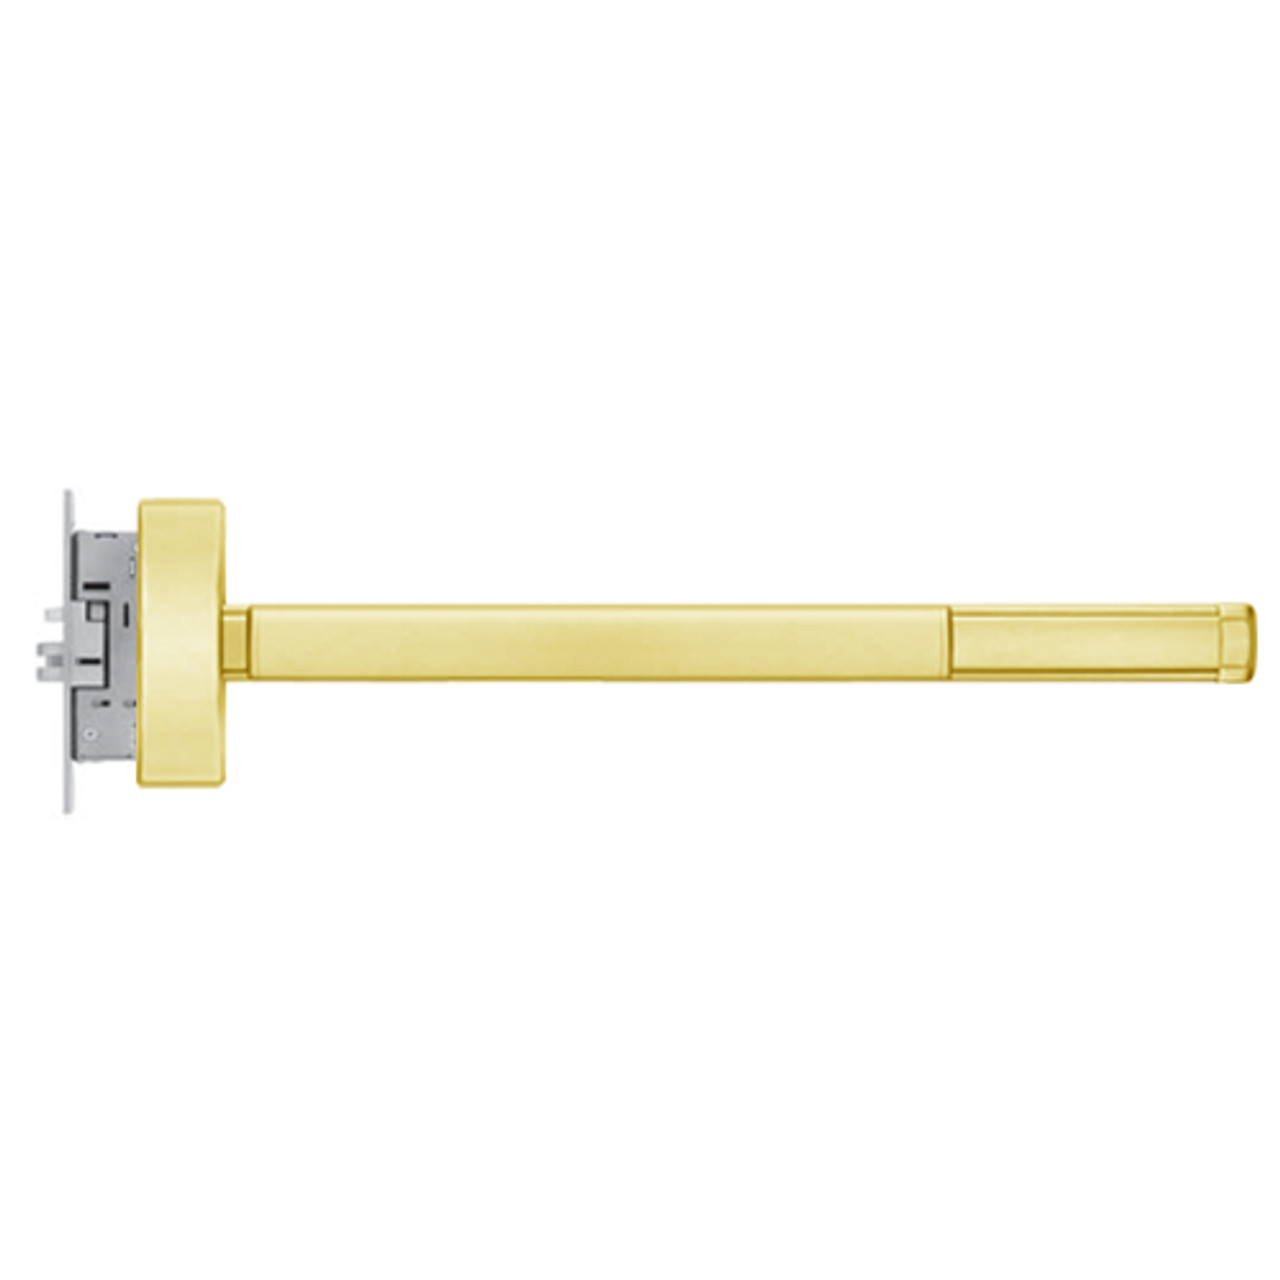 FL2308-RHR-605-36 PHI 2300 Series Fire Rated Apex Mortise Exit Device Prepped for Key Controls Lever/Knob in Bright Brass Finish